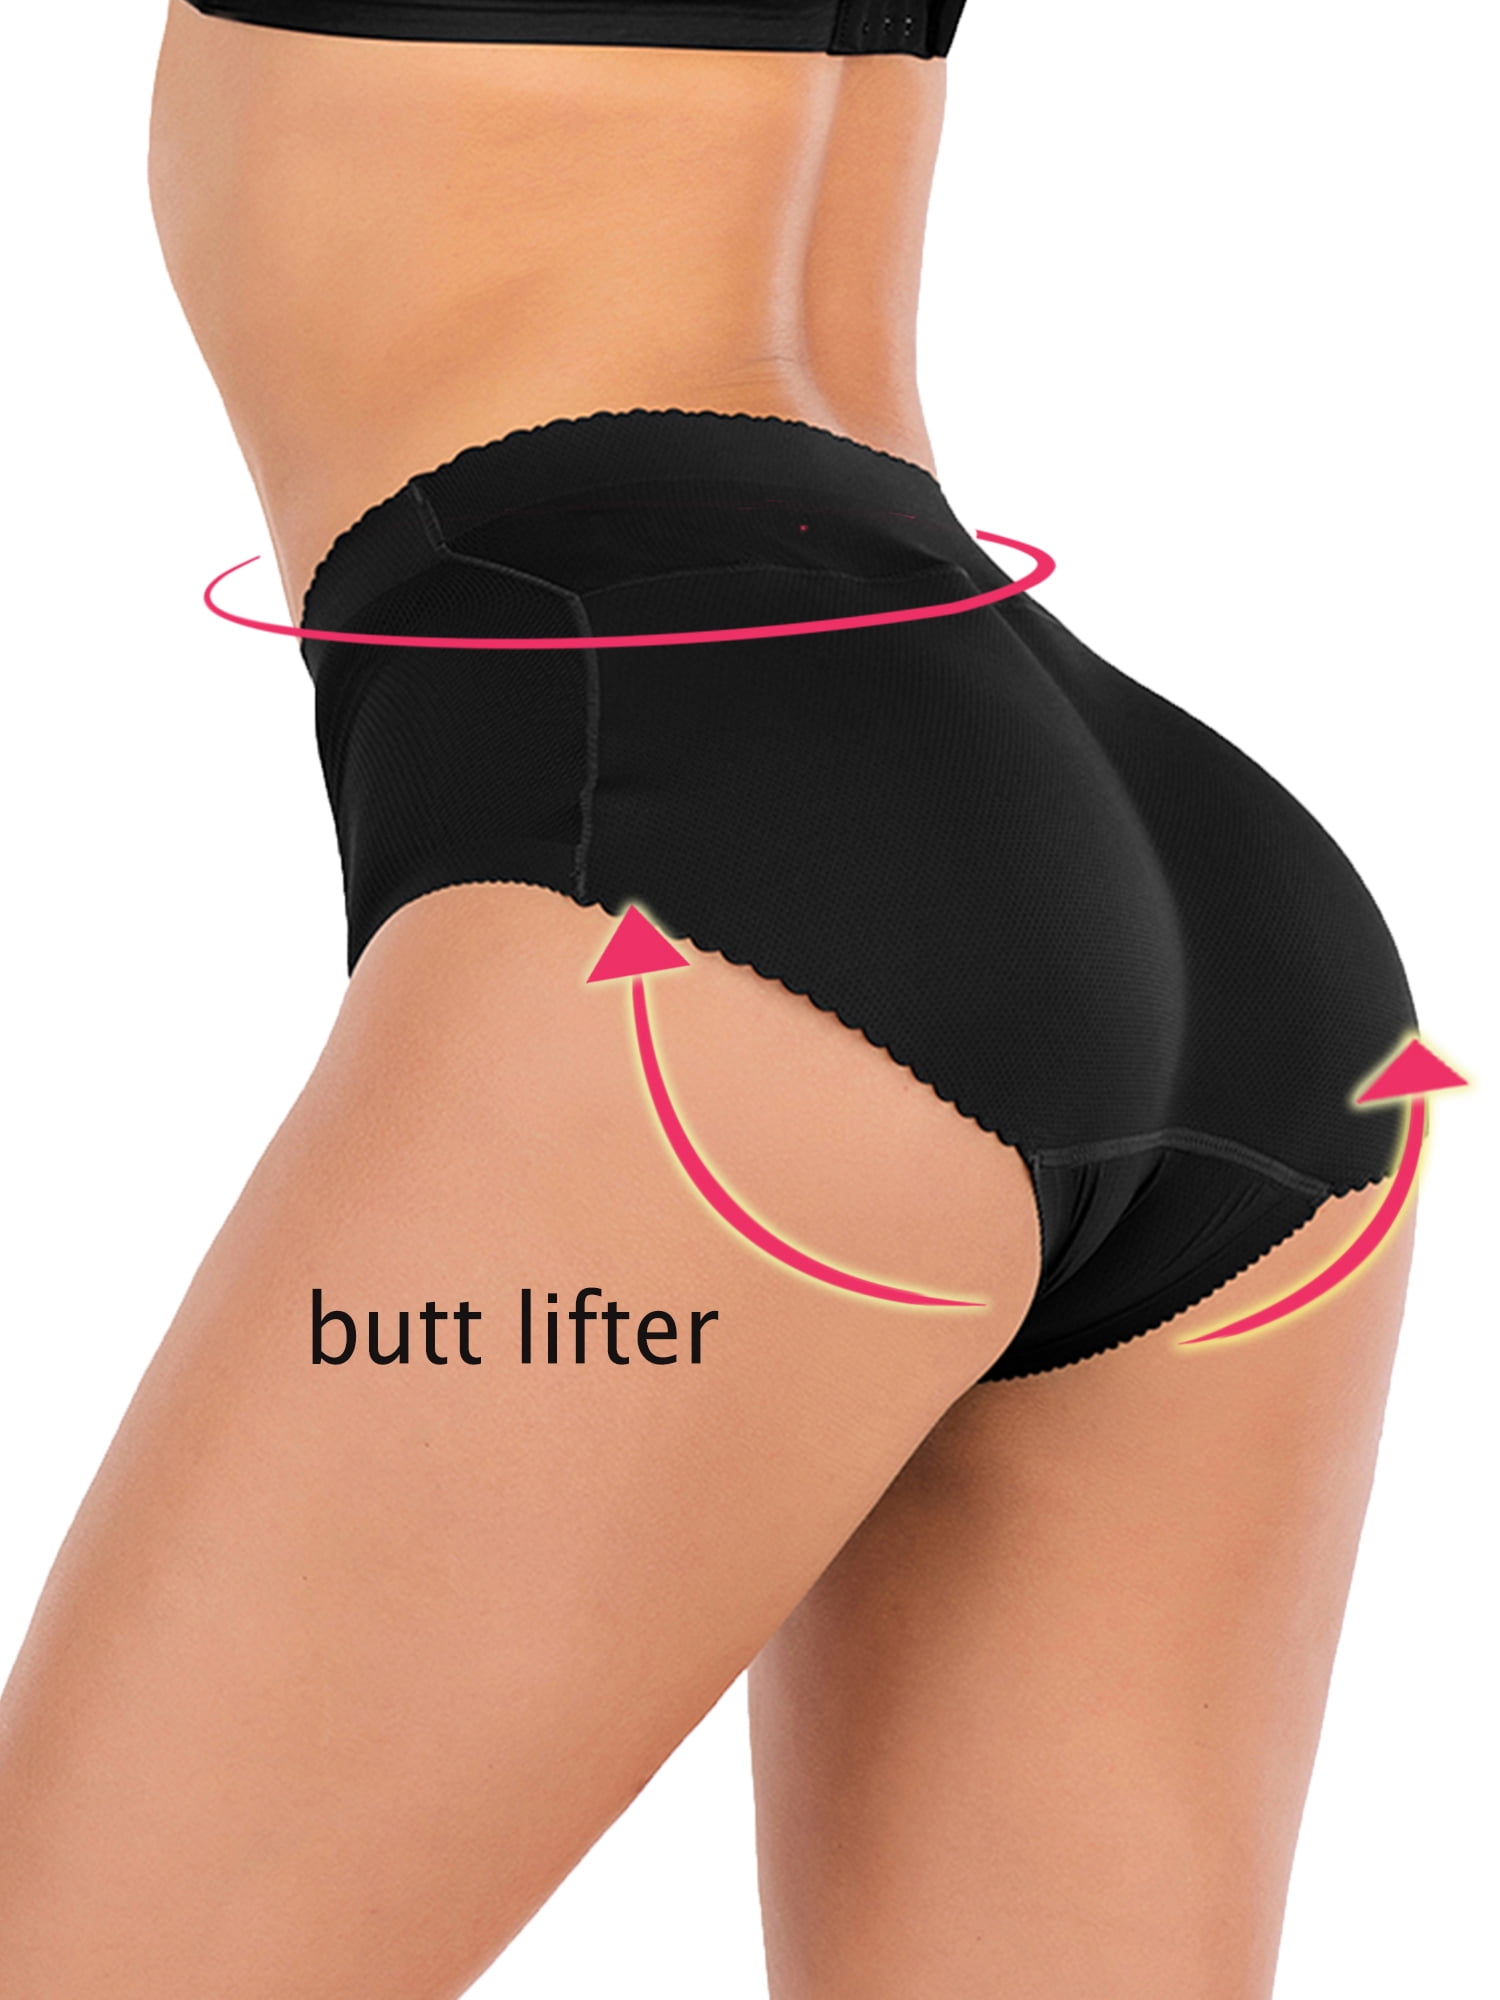 DODOING High Waisted Tummy Control Thong Pants Knickers Underwear Seamless  Butt Lifter Shapewear Slimming Body Shaper Shorts for Women